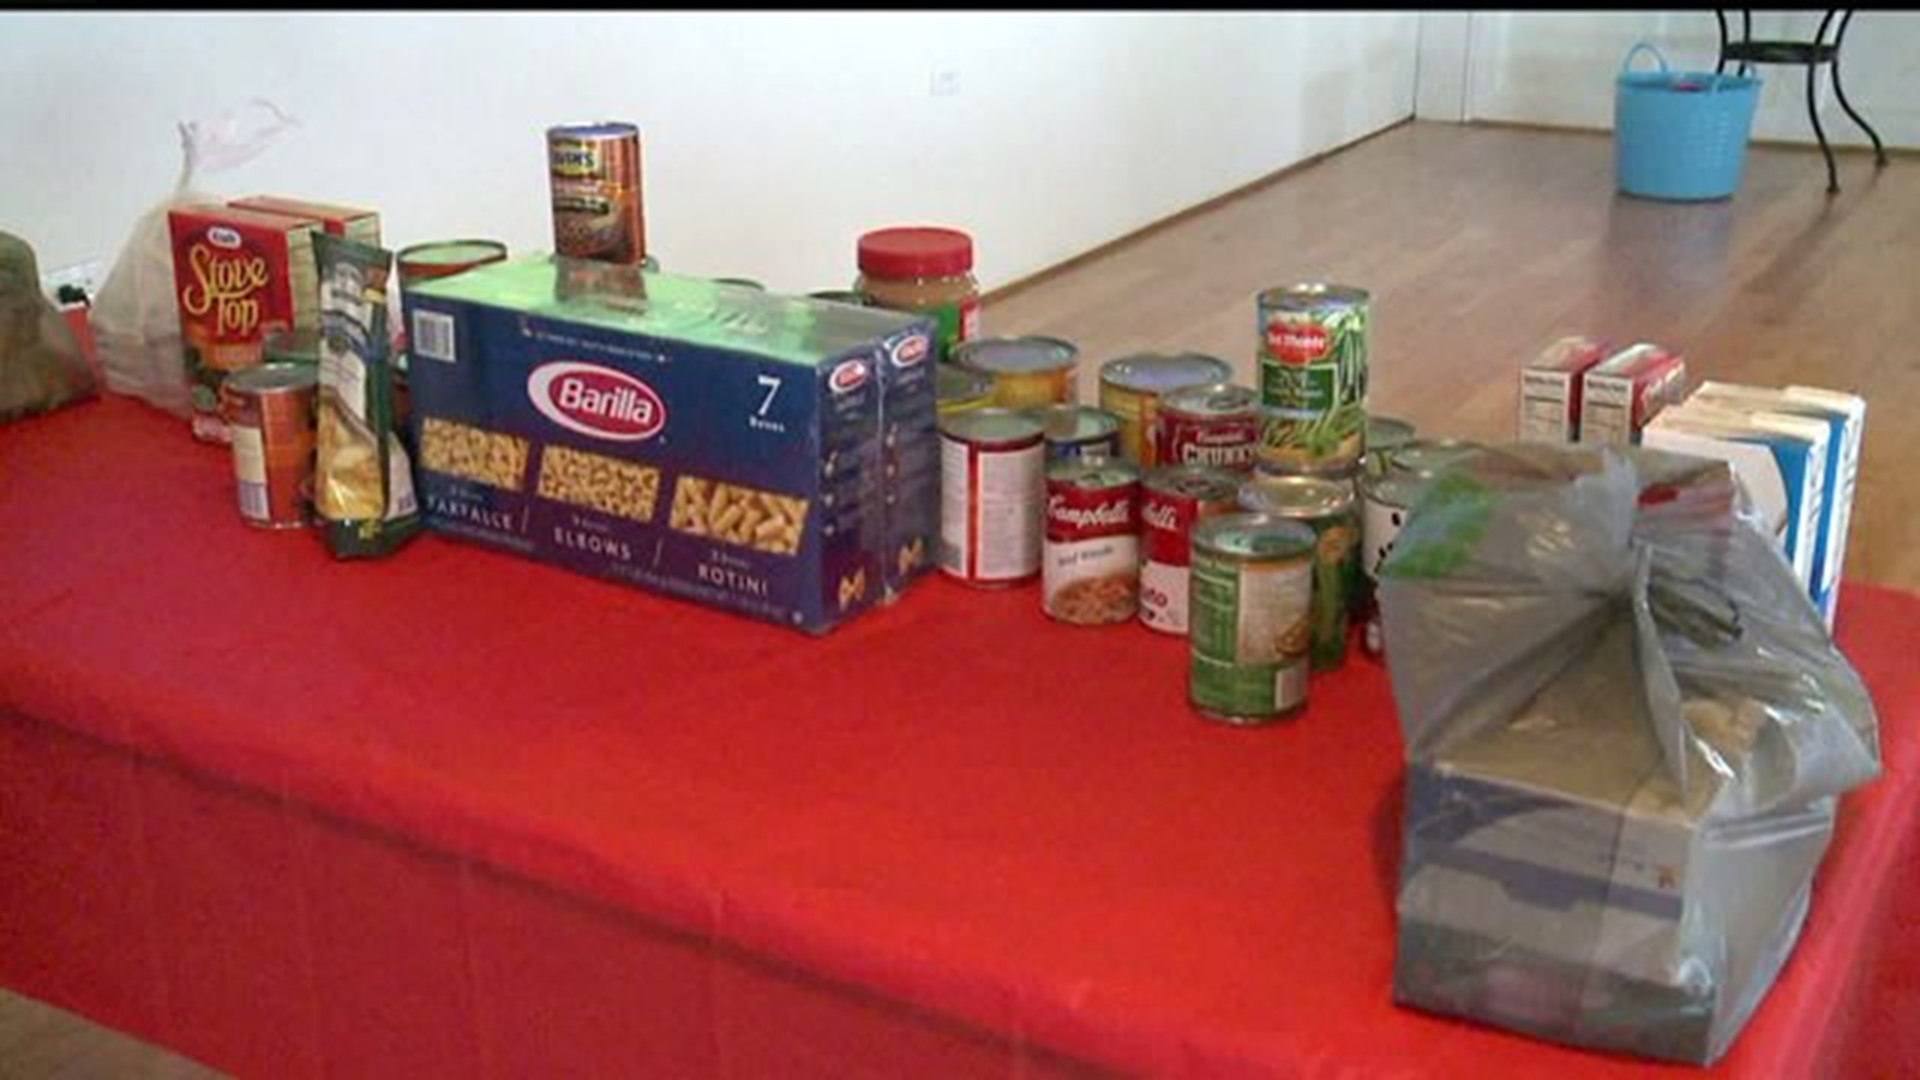 "Souper Bowl" held to collect food to stock local food pantry